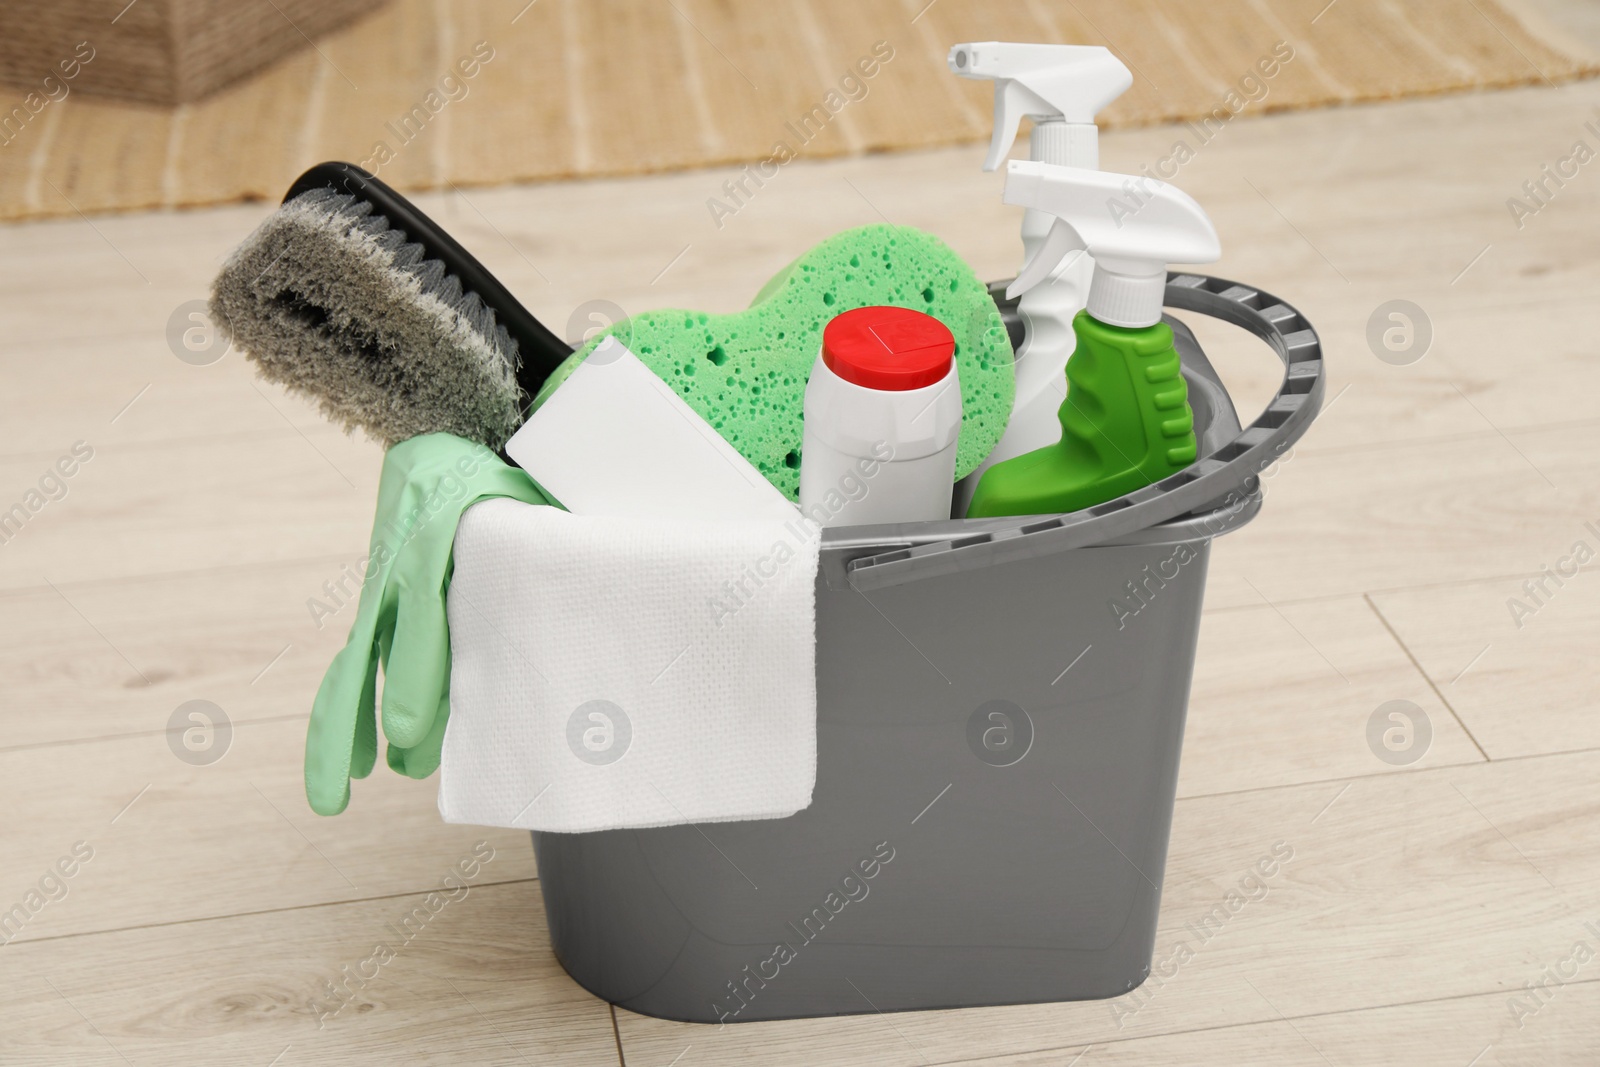 Photo of Different cleaning products in bucket on floor indoors